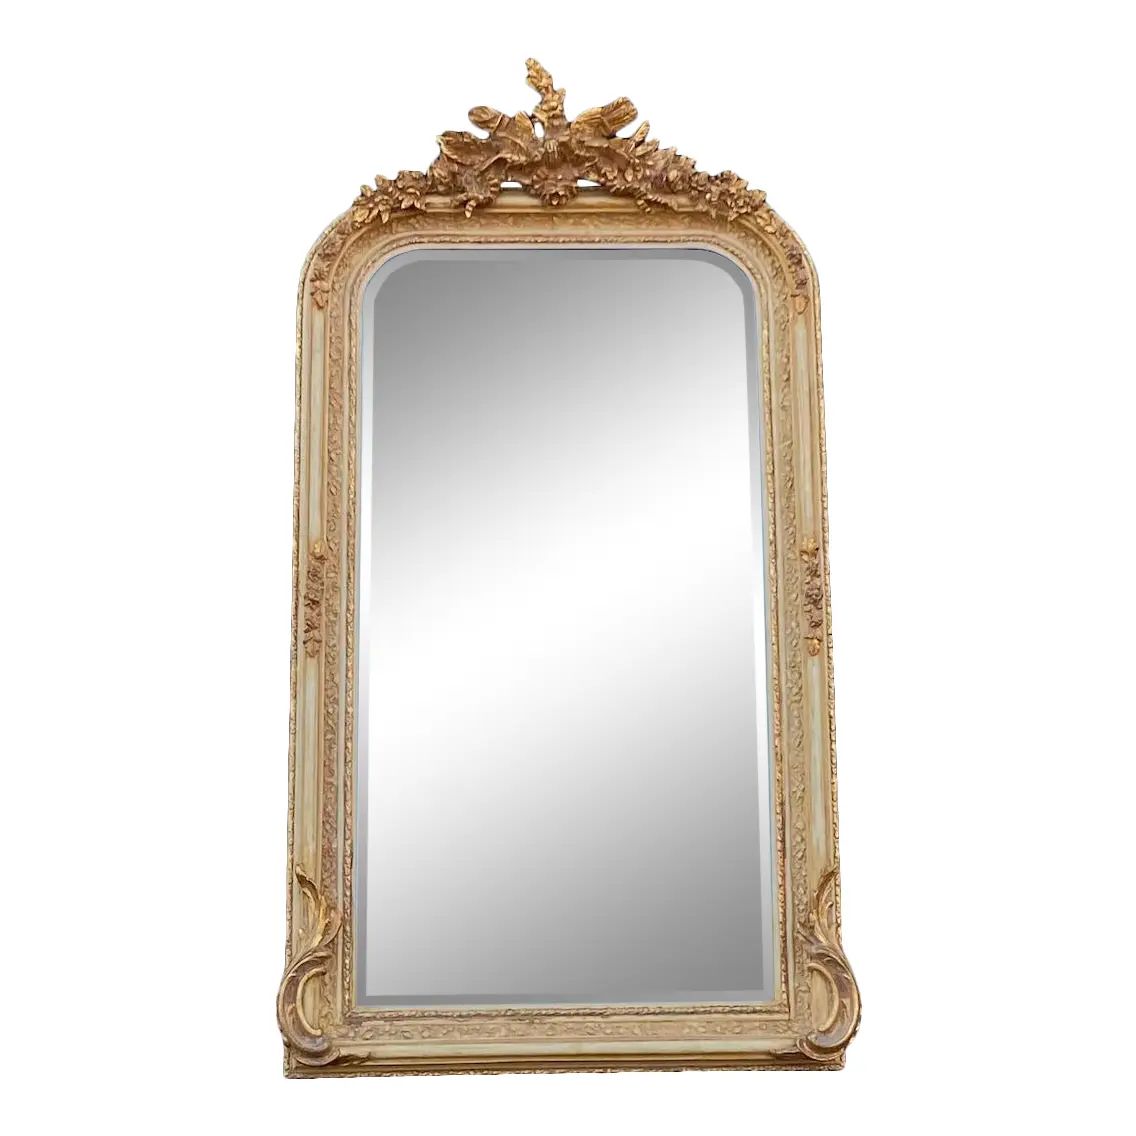 French Louis XVI-Style Mirror in Antique Gold Leaf and Creme Finish | Chairish